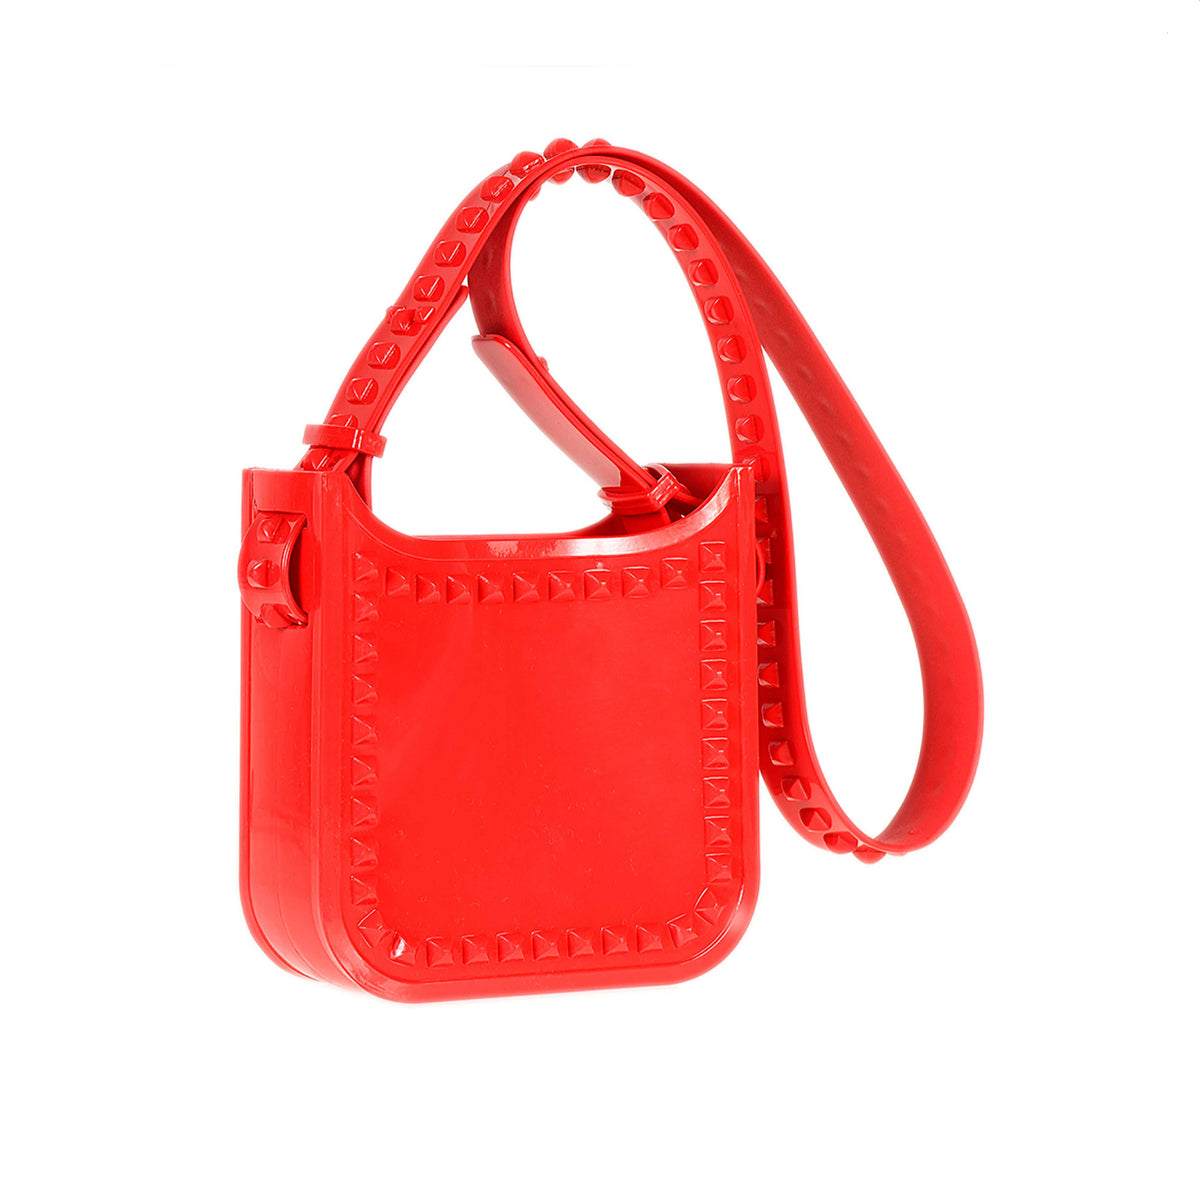 Carmen Sol sustainable jelly bag in color red perfect for any occasion